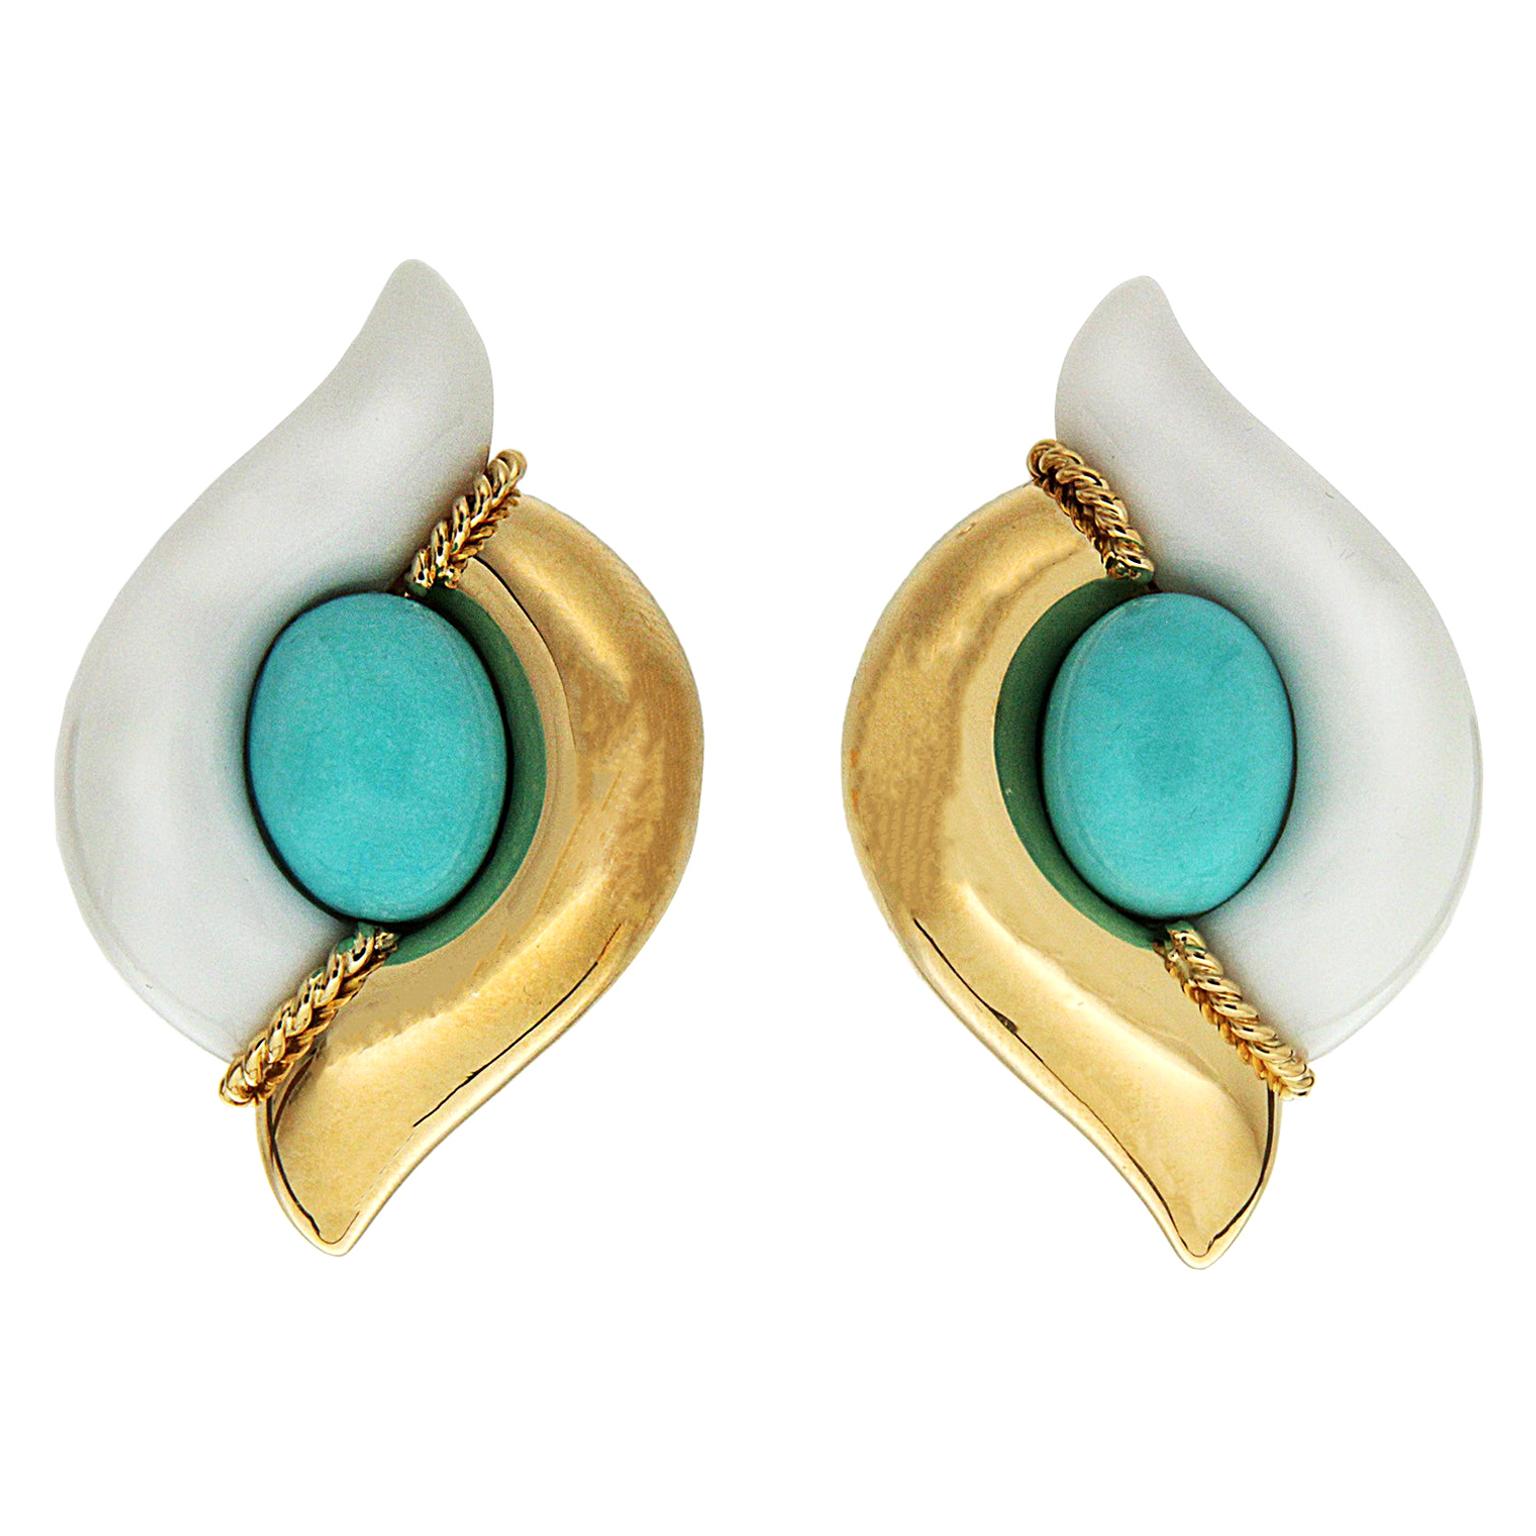 Valentin Magro Turquoise Cacholong Yellow Gold Double Pointed Earrings